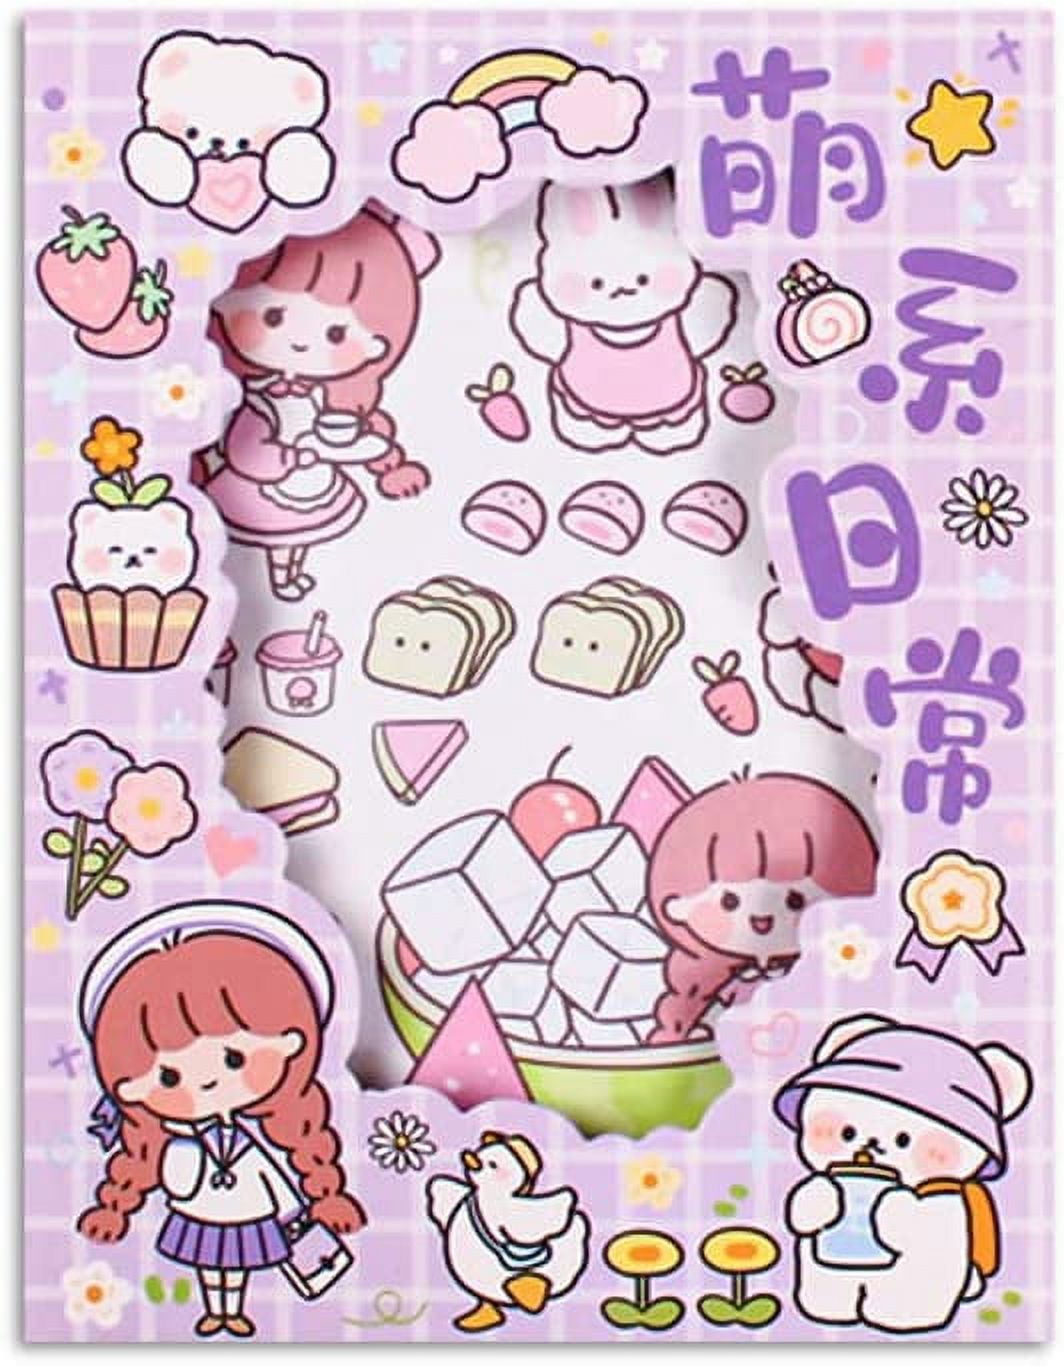 GOMTYEA Washi Cute Stickers for Journaling(100 Sheets)- Kawaii Cartoon Figure Flower Small Decorative Planner Stickers for Scrapbooking Junk Journ